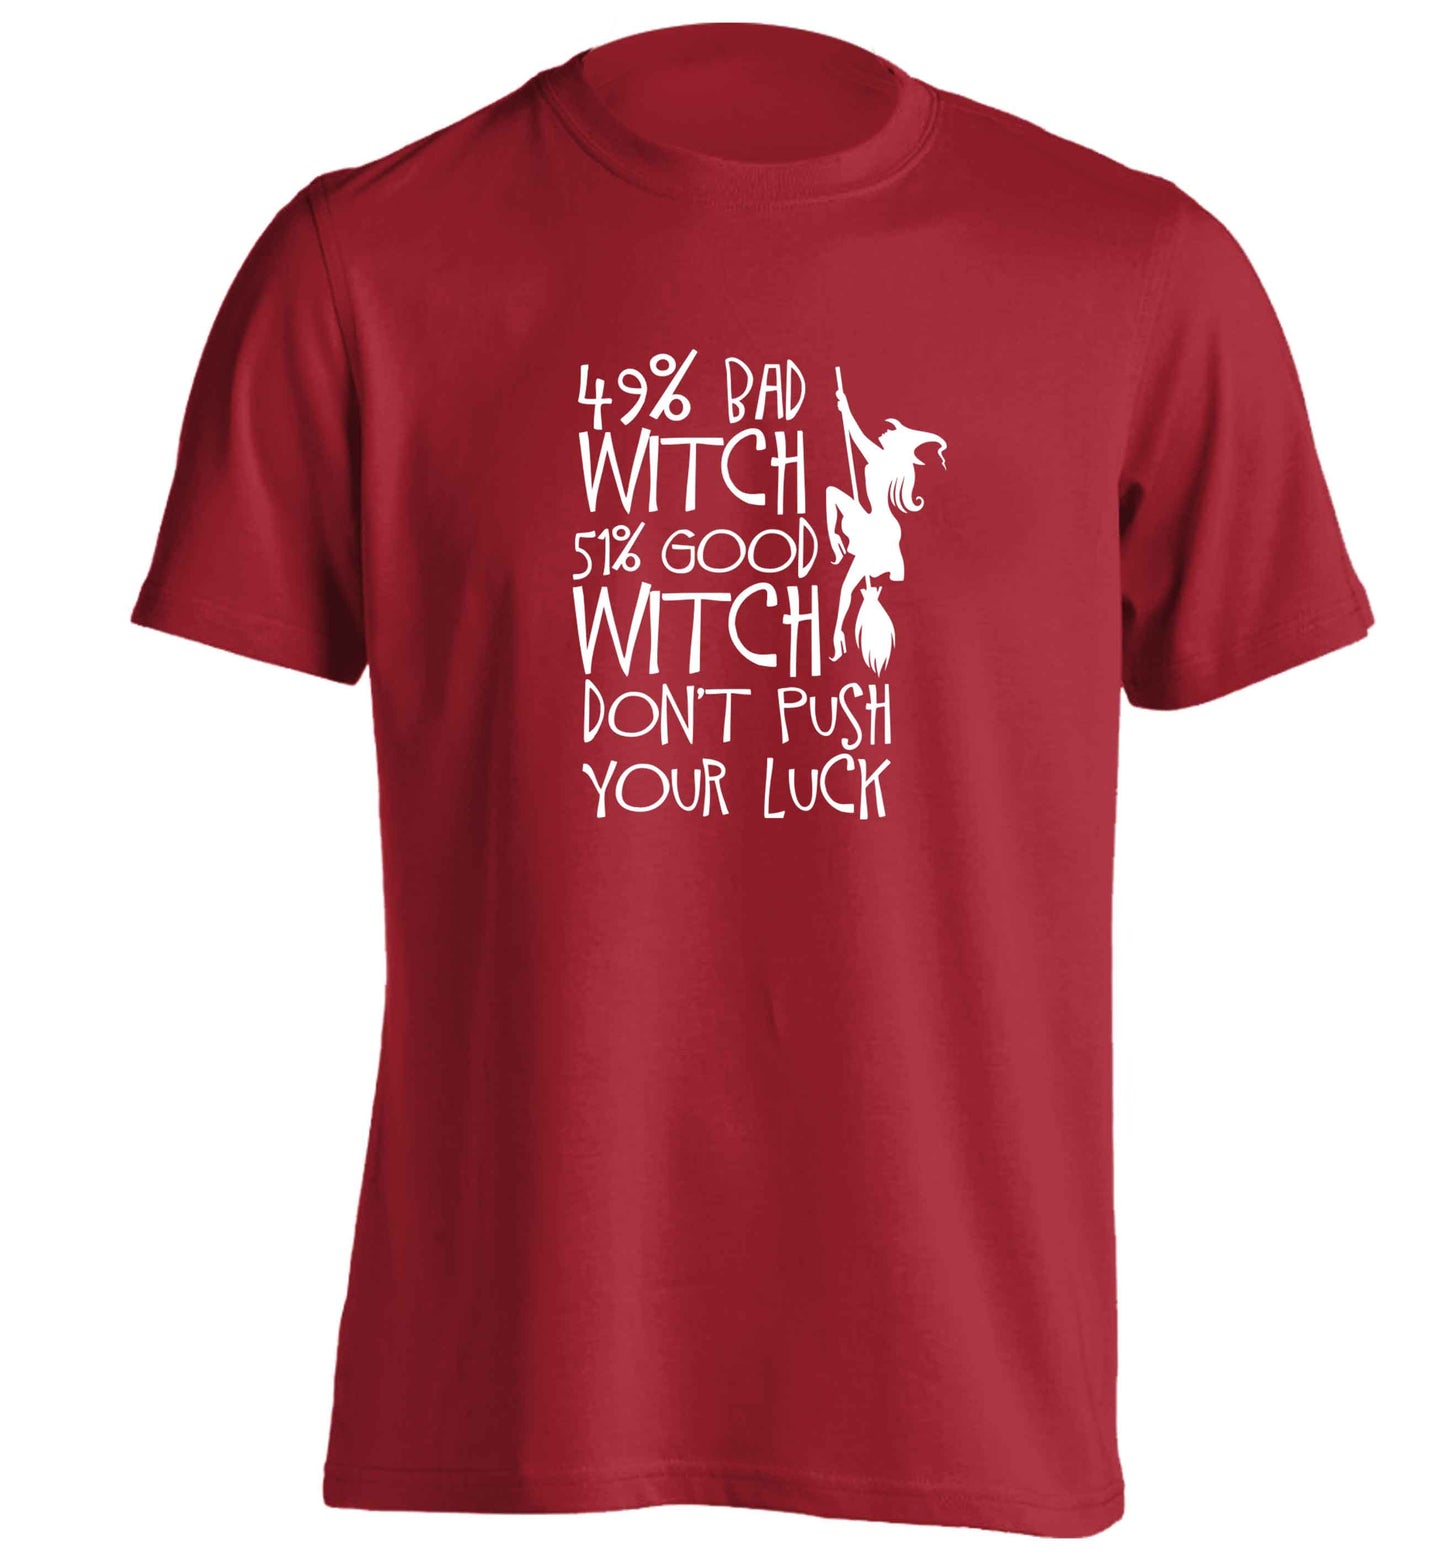 49% bad witch 51% good witch don't push your luck adults unisex red Tshirt 2XL